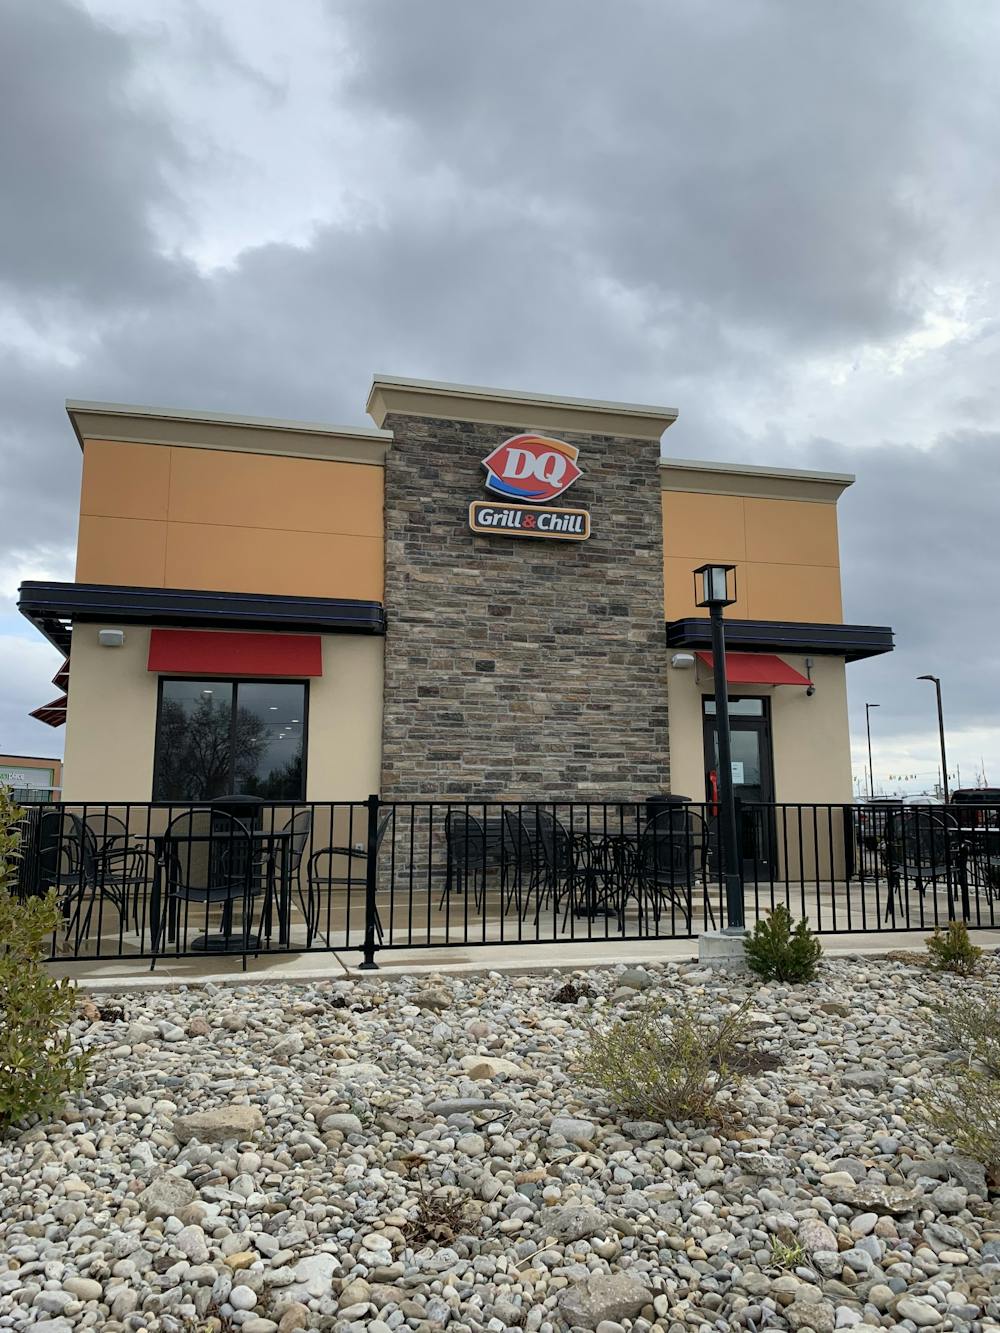 The Oxford Dairy Queen is set to open this summer, modeled after the new-generation style, like the Liberty Township location (pictured above).